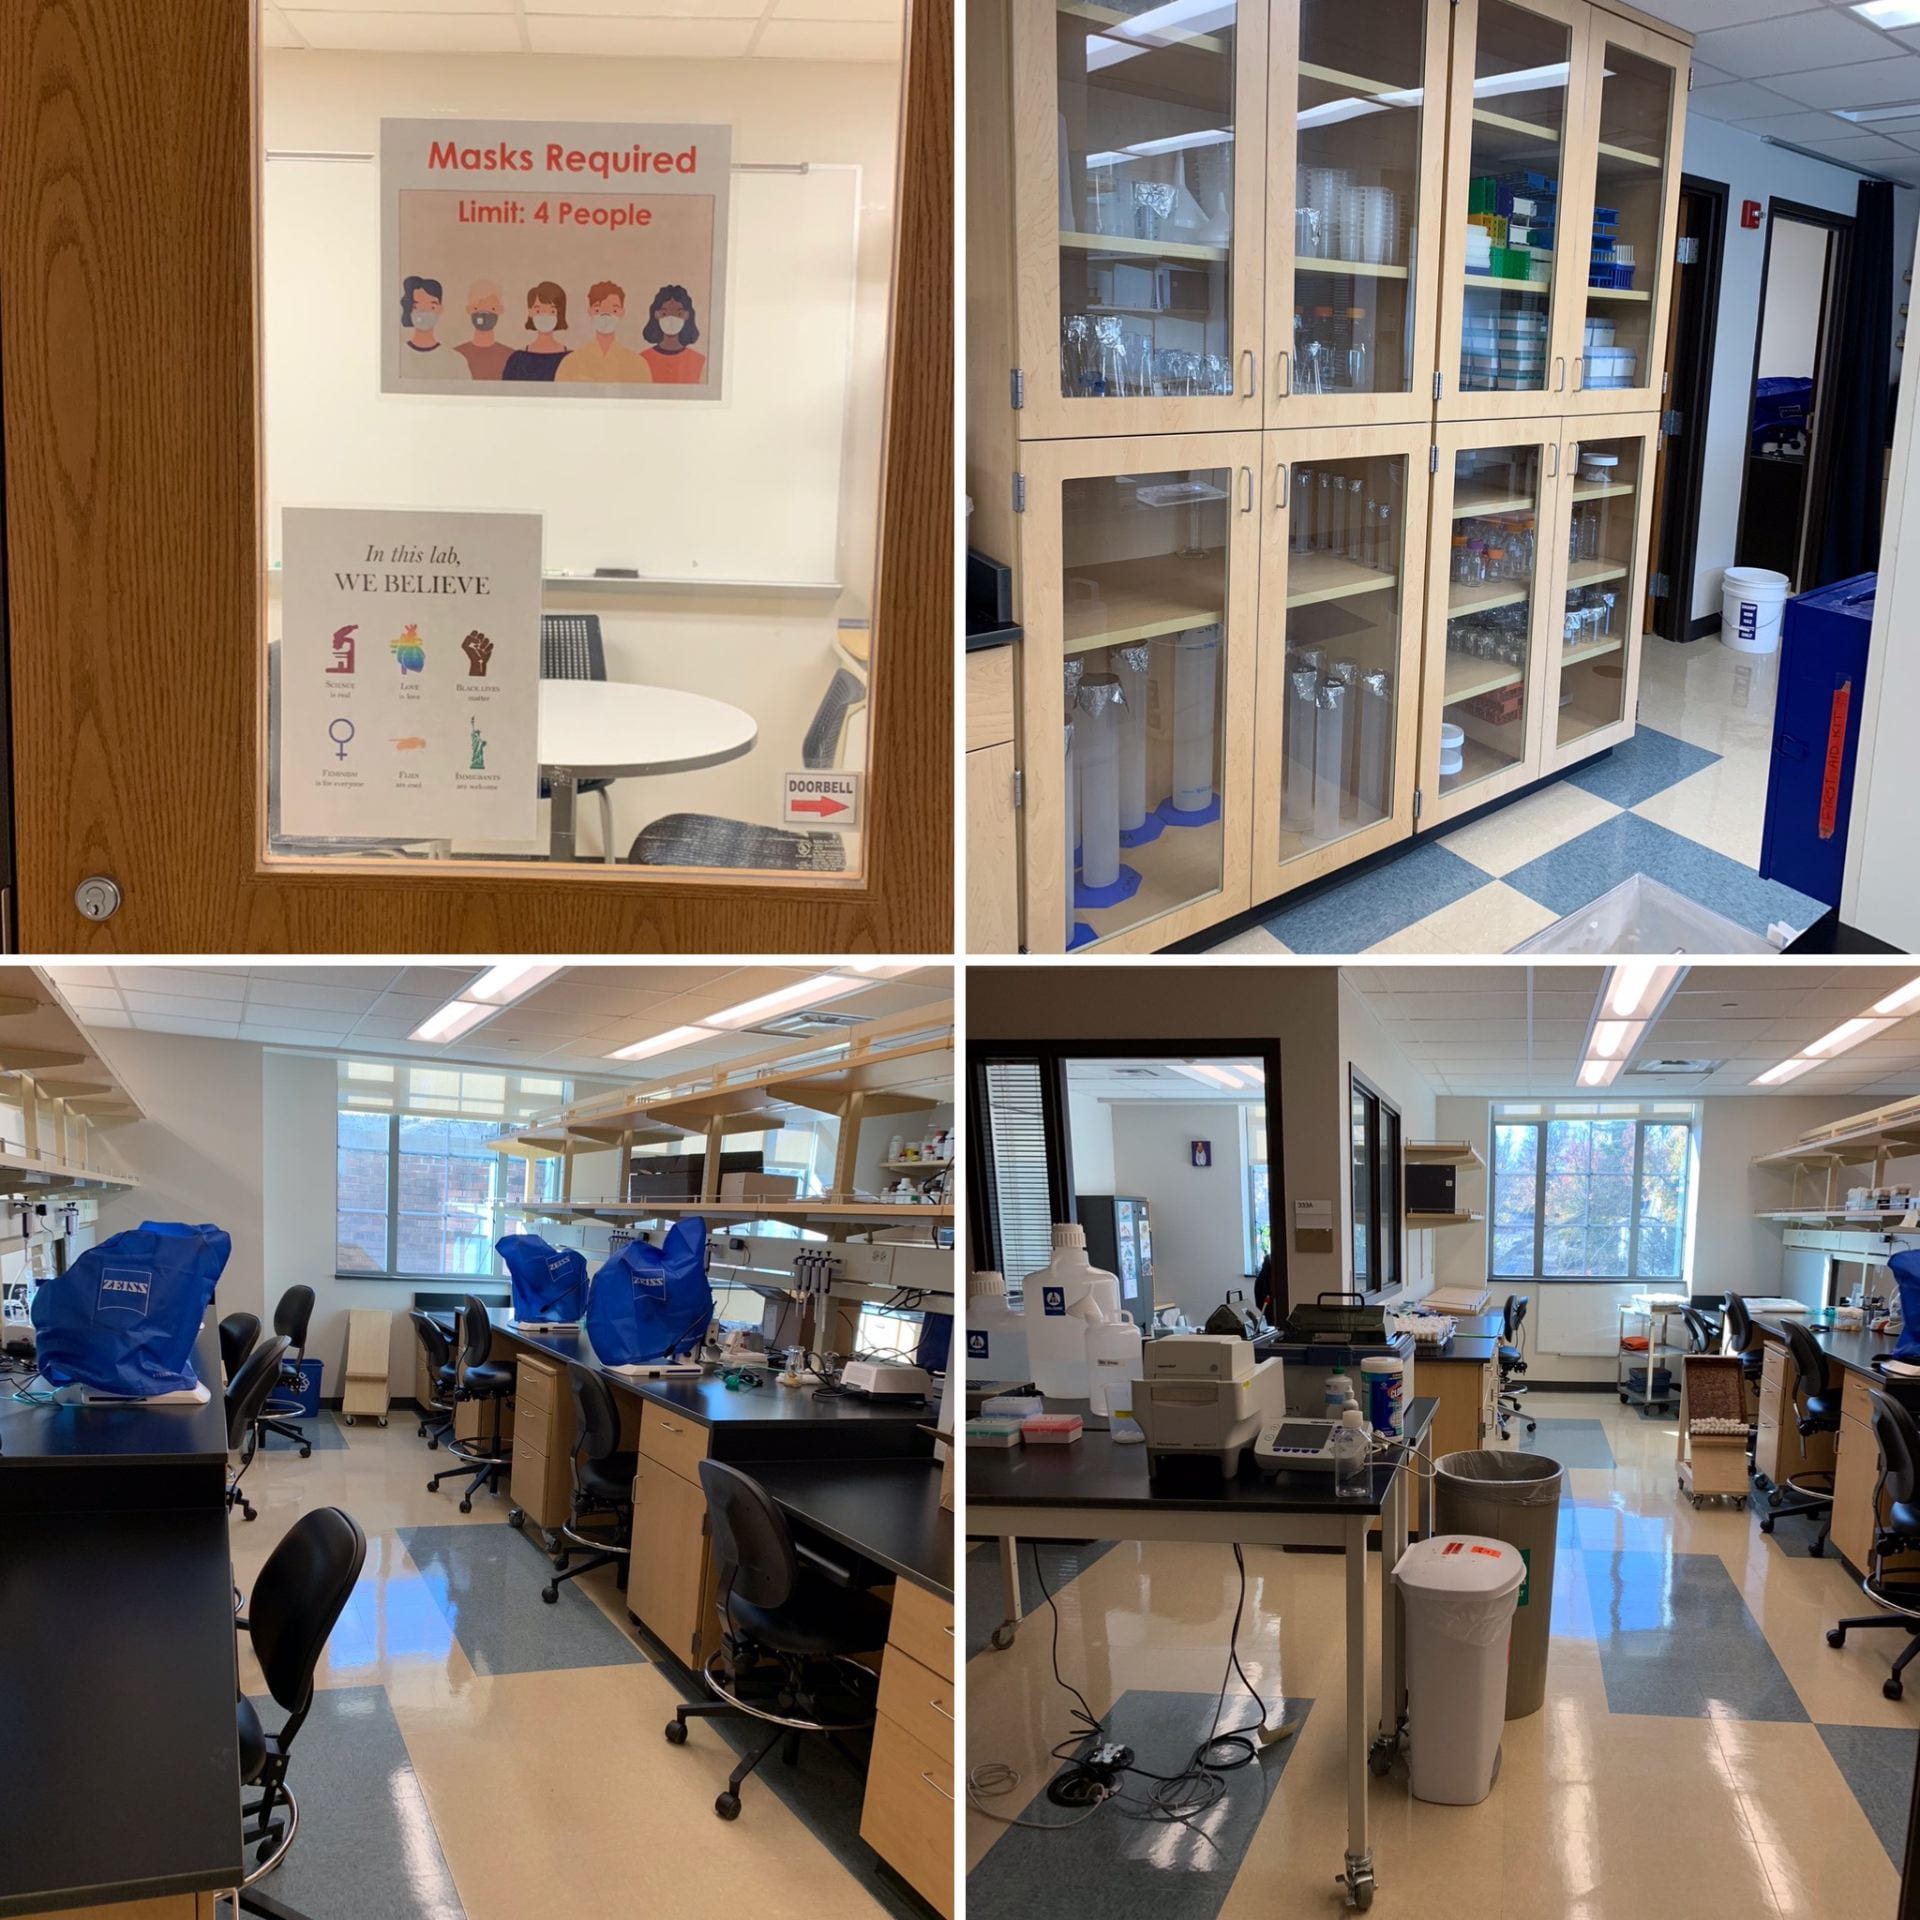 Pictured is a collage of four images of the Weaver lab. The top left is the entrance door with safety signs, the top right is a large cabinet with various types of lab equipement, the bottom left shows a lab bench with a row of microscopes with blue covers, and the bottom right shows her office entrance from within the lab.